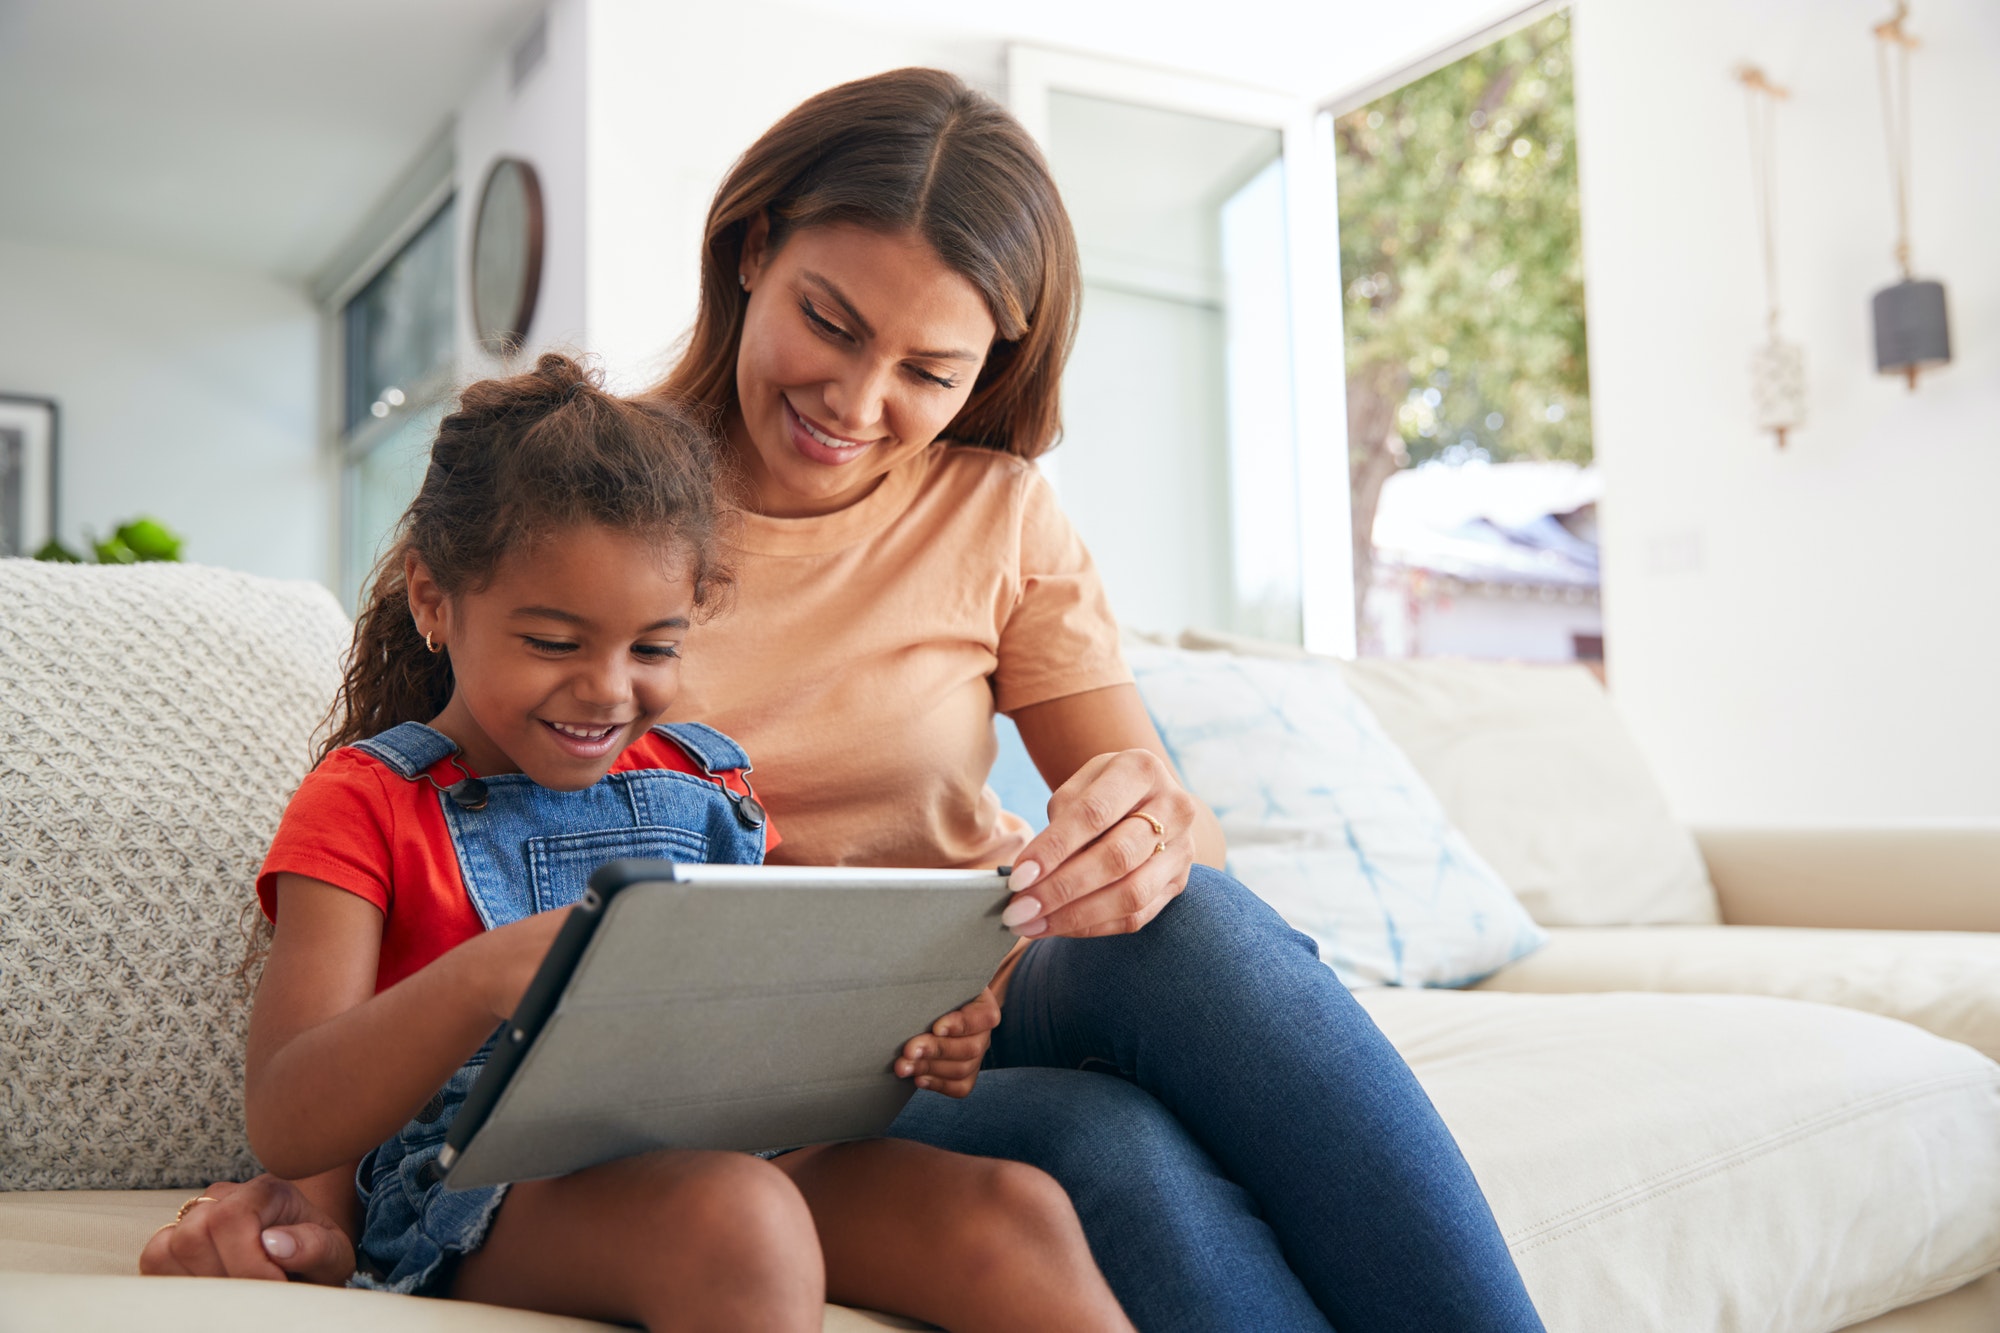 Hispanic Mother Helping Daughter To Home School And Do Homework With Digital Tablet